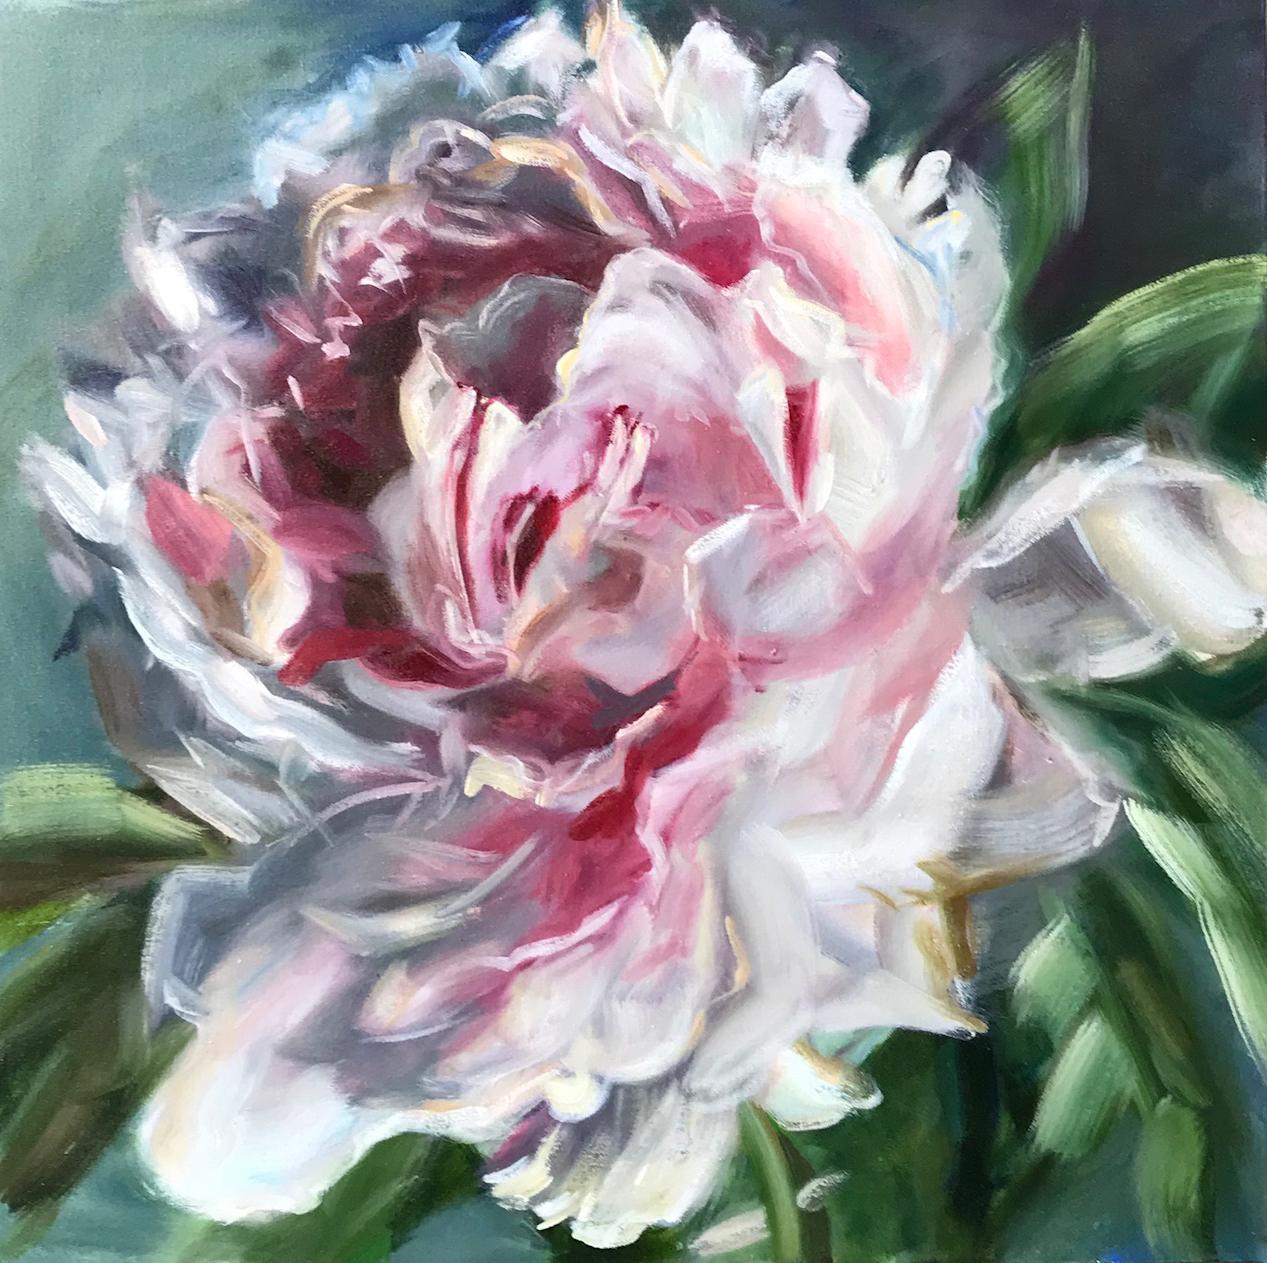 Evrard's paintings on canvas, panel and copper are composed of many layers of gestural brushstrokes, rendered in bright pigments to reflect the dynamism of her signature floral subject matter. Her compositions often incorporate dark swatches of deep